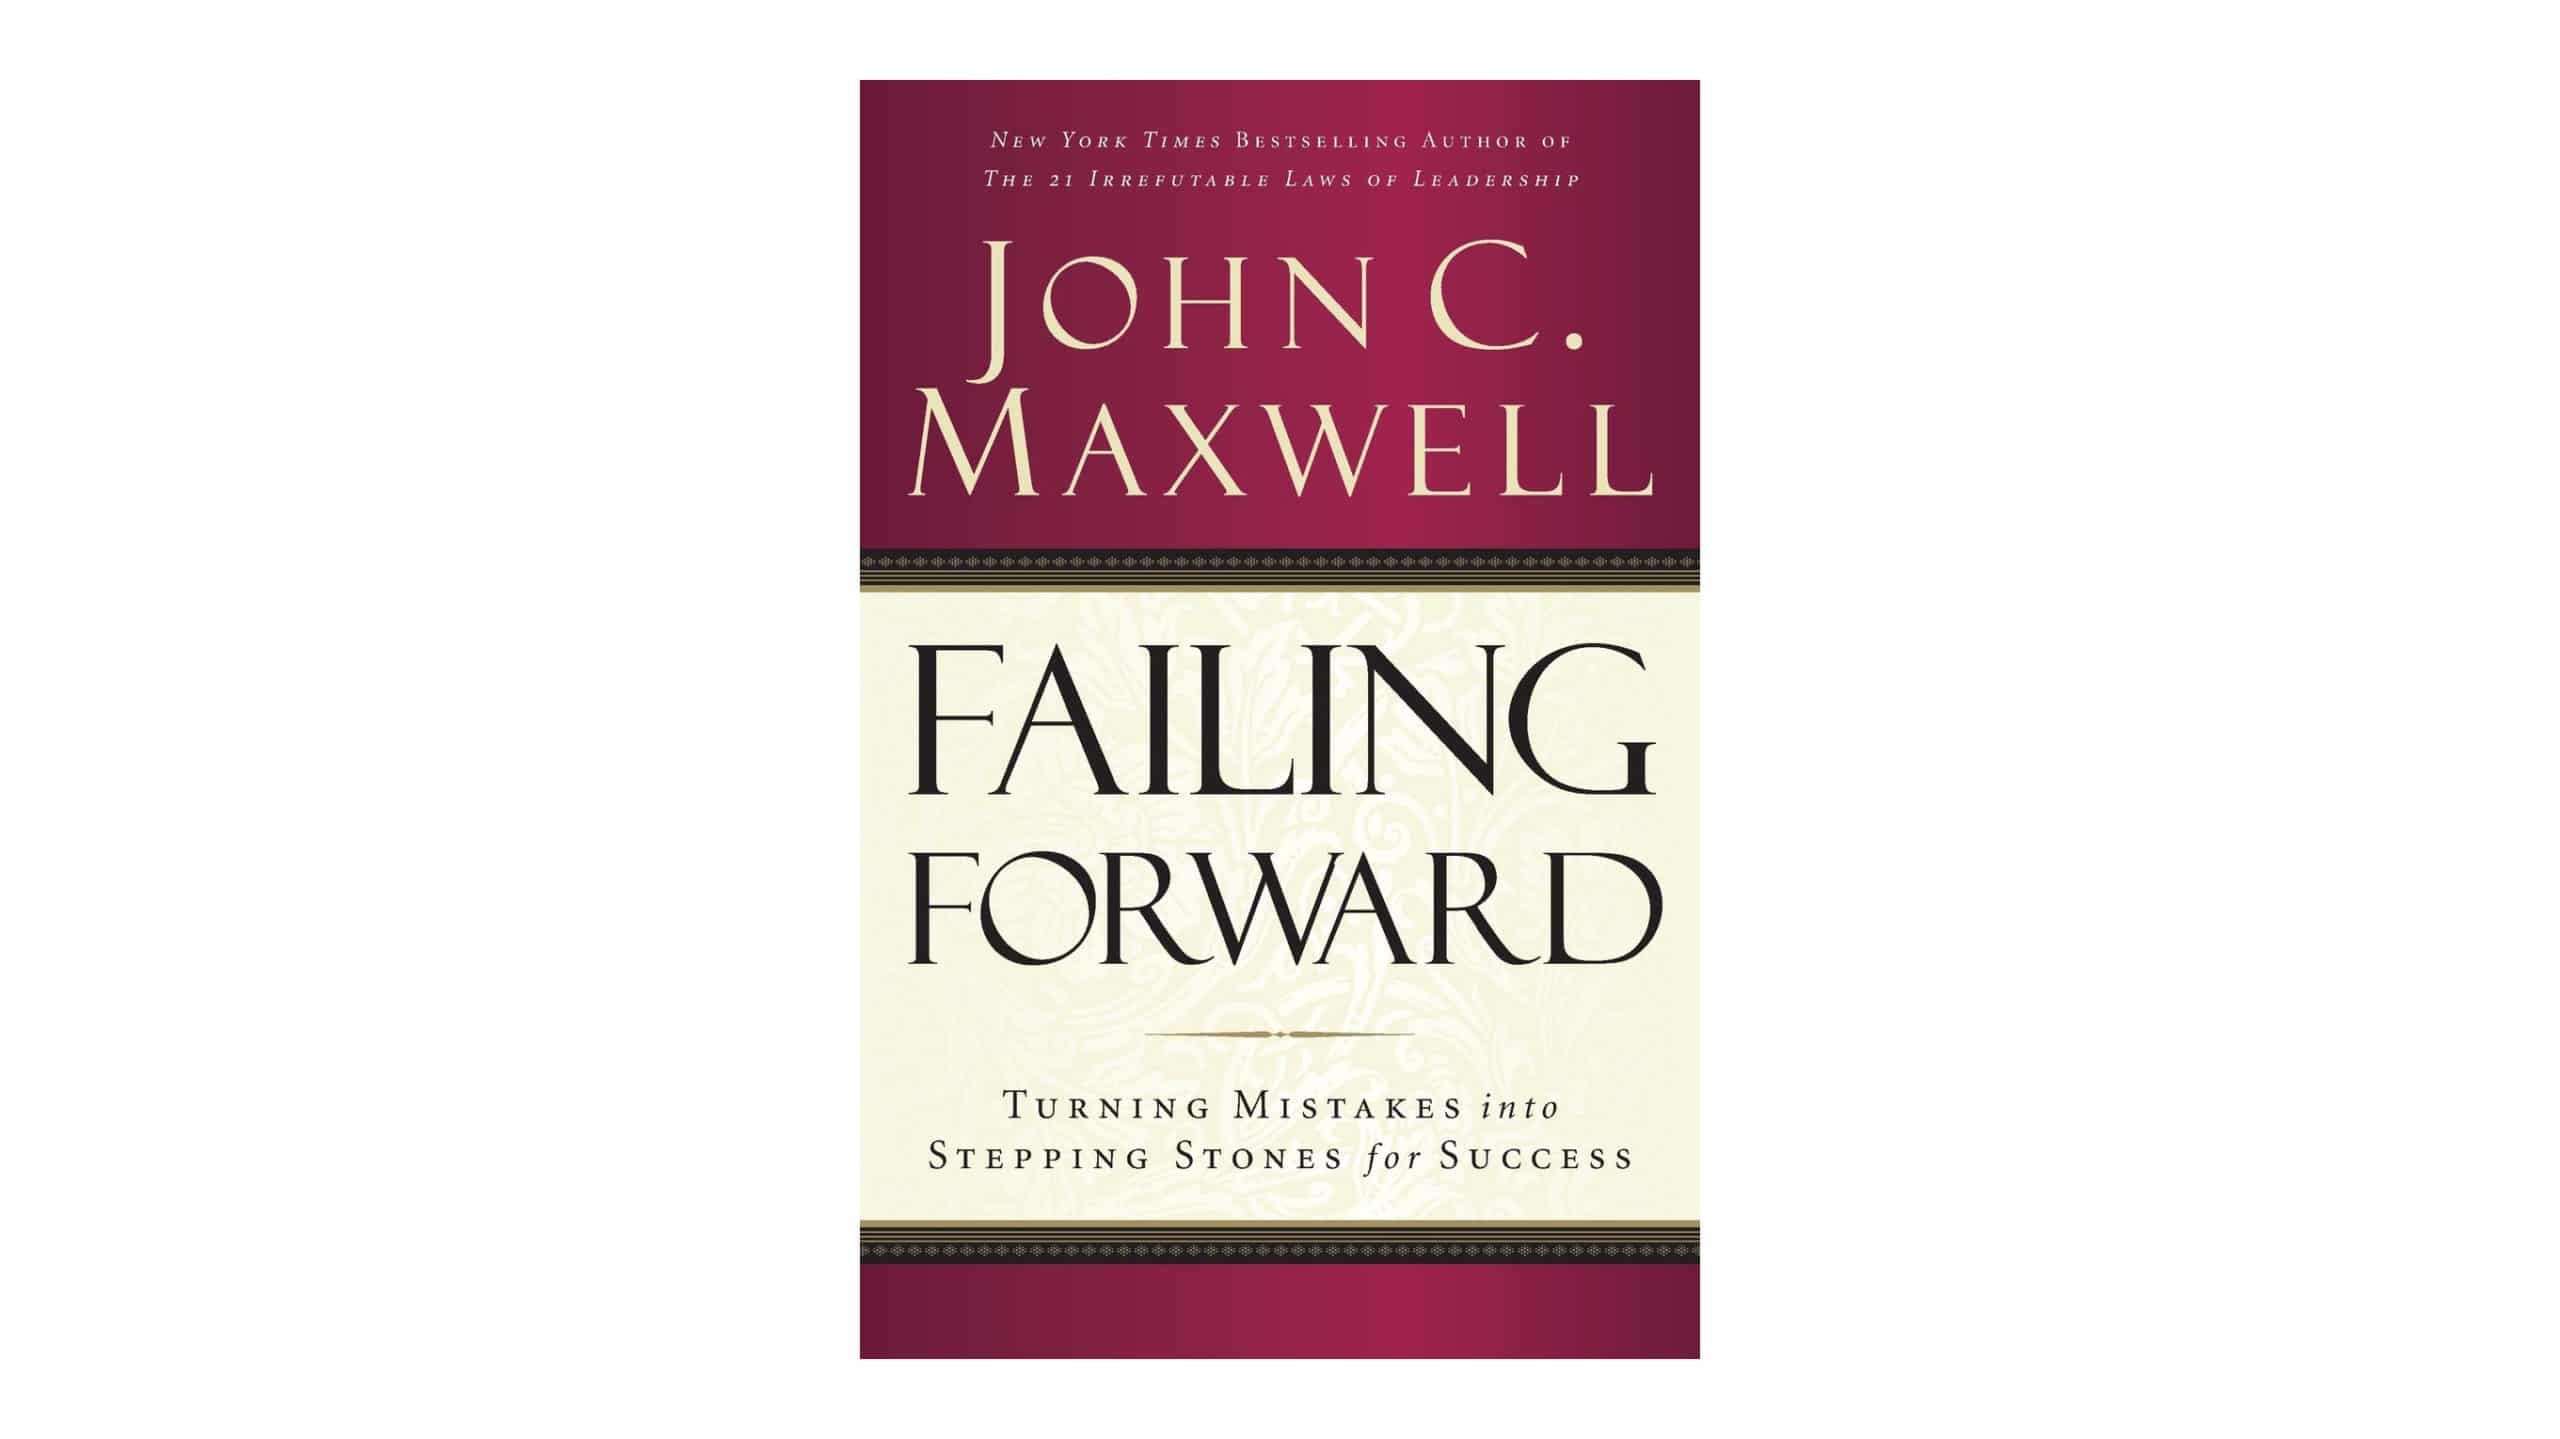 Failing Forward: Turning Mistakes Into Stepping Stones for Success